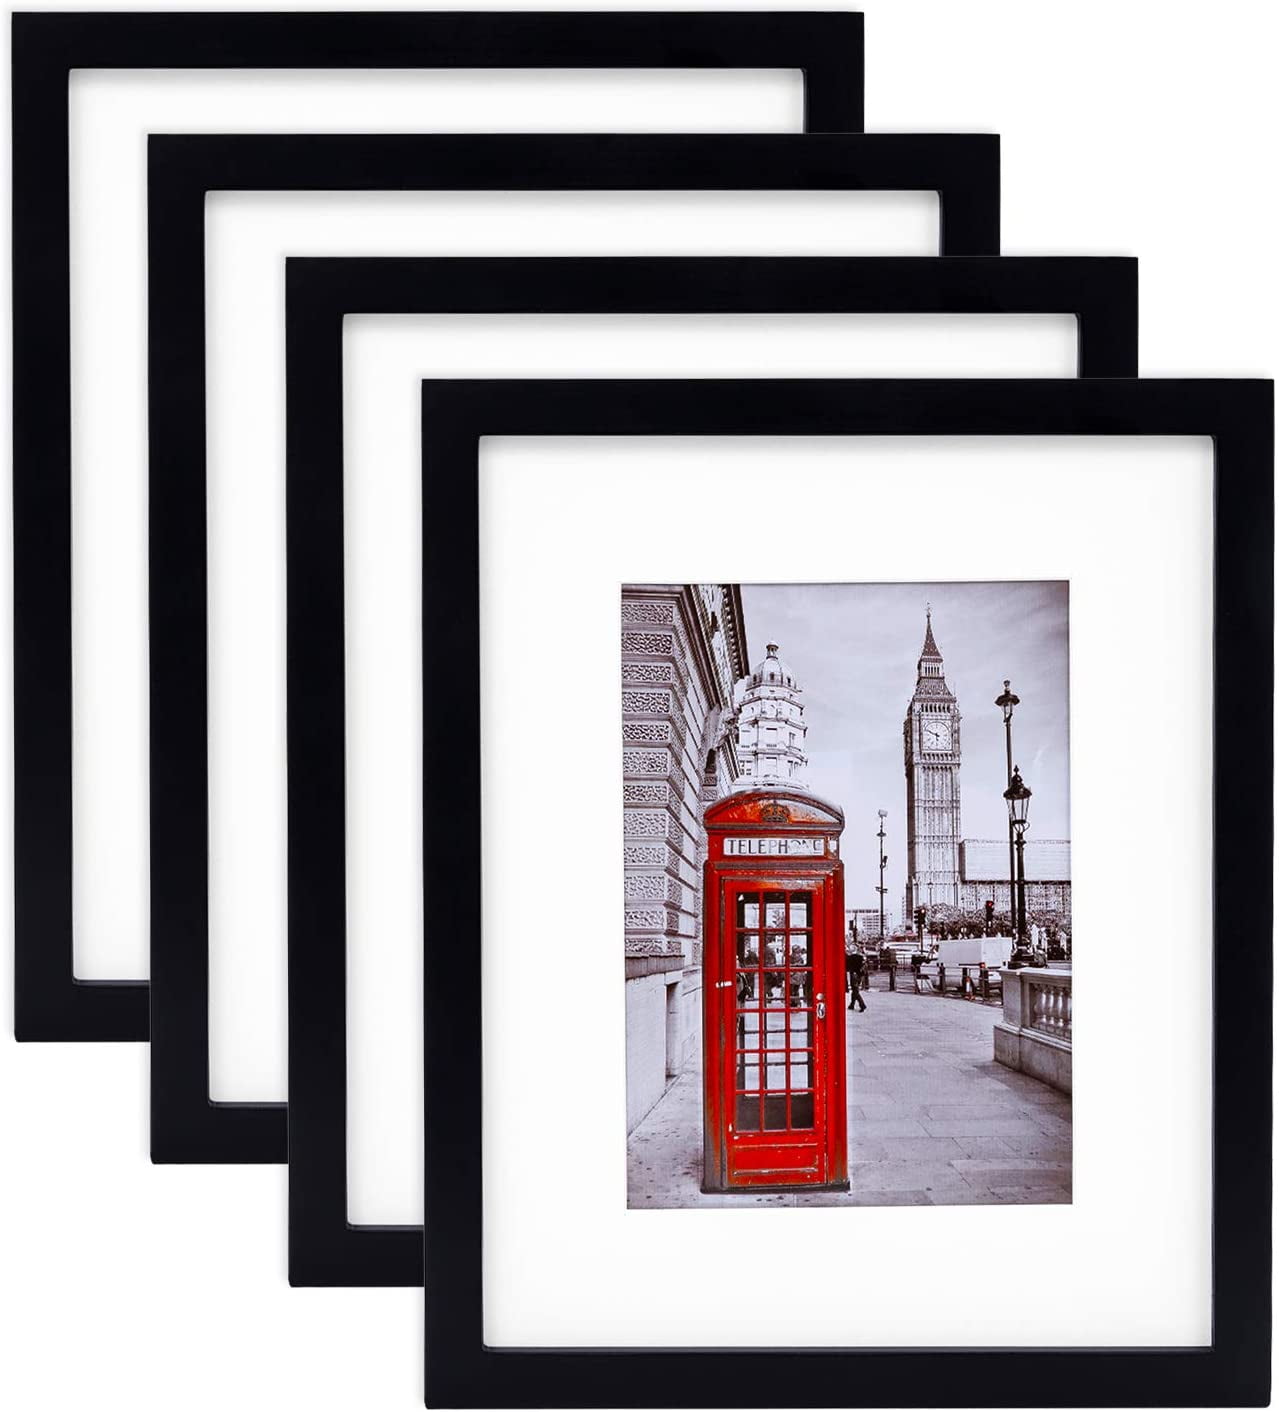 Hang/Stand Real Glass White Picture Photo Frame for Wall and Table Top-Mounting Hardware Included 1 Pack Beyond Your Thoughts 11X14 with Matted for 8X10 or 9x12 Real Wood